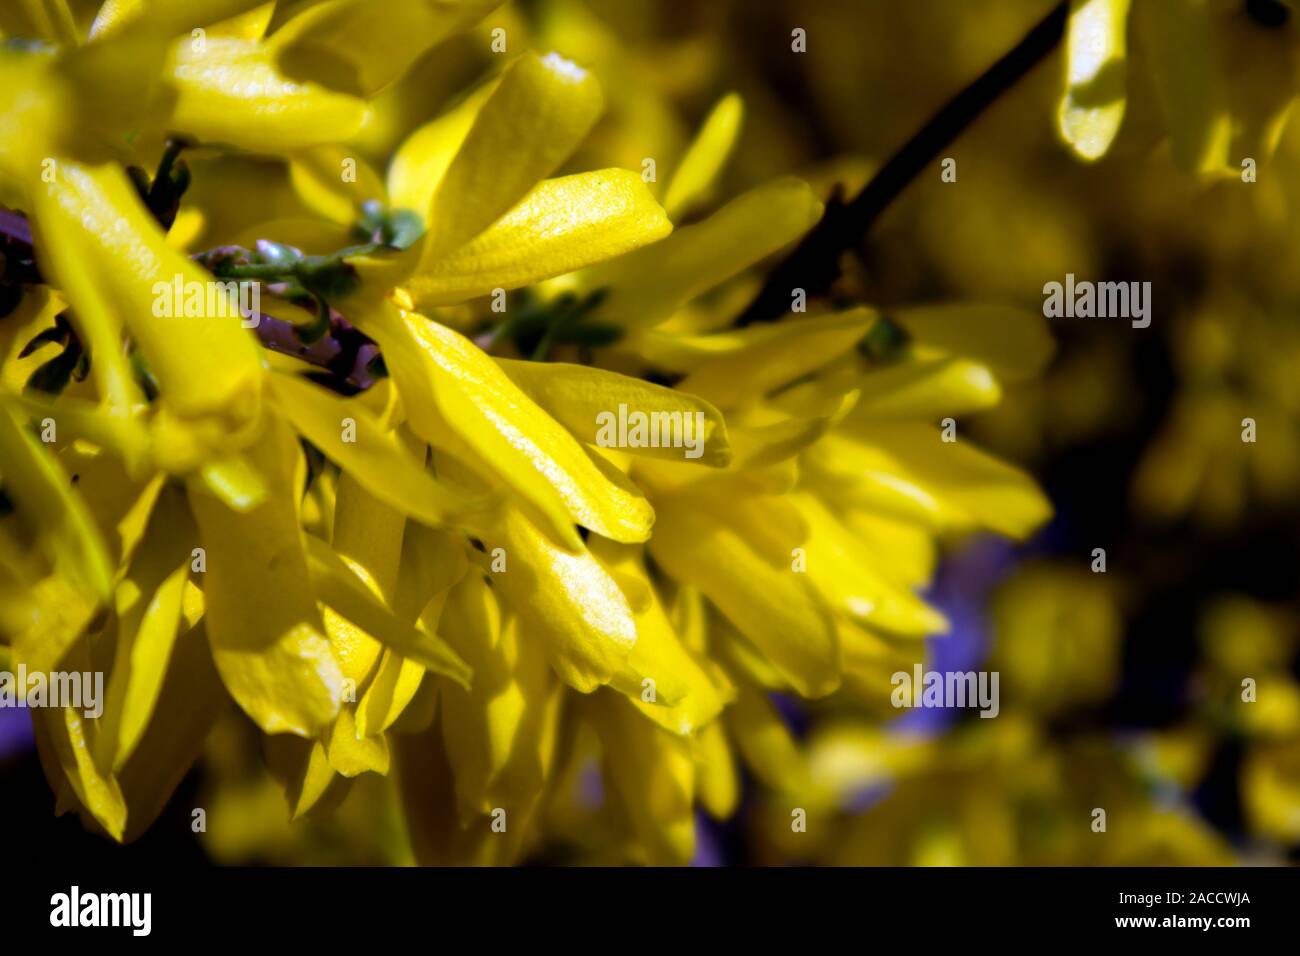 The branch of blooming Forsythia Intermedia covered with bright yellow flowers growing in the park Stock Photo